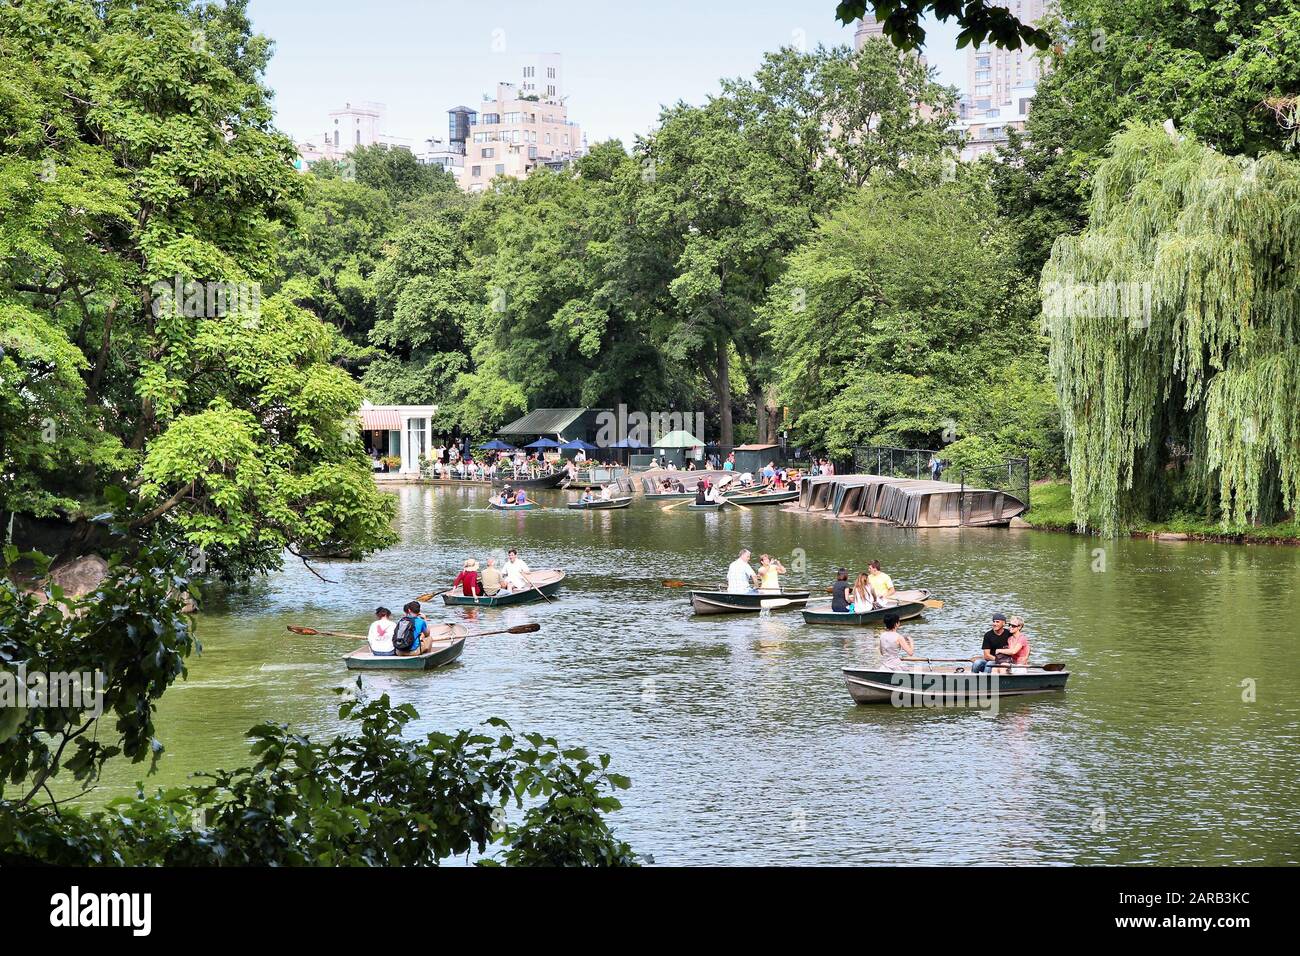 NEW YORK, USA - JULY 2, 2013: People visit Central Park in New York. Park opened in 1857 and covers 840 acres of land today. Stock Photo